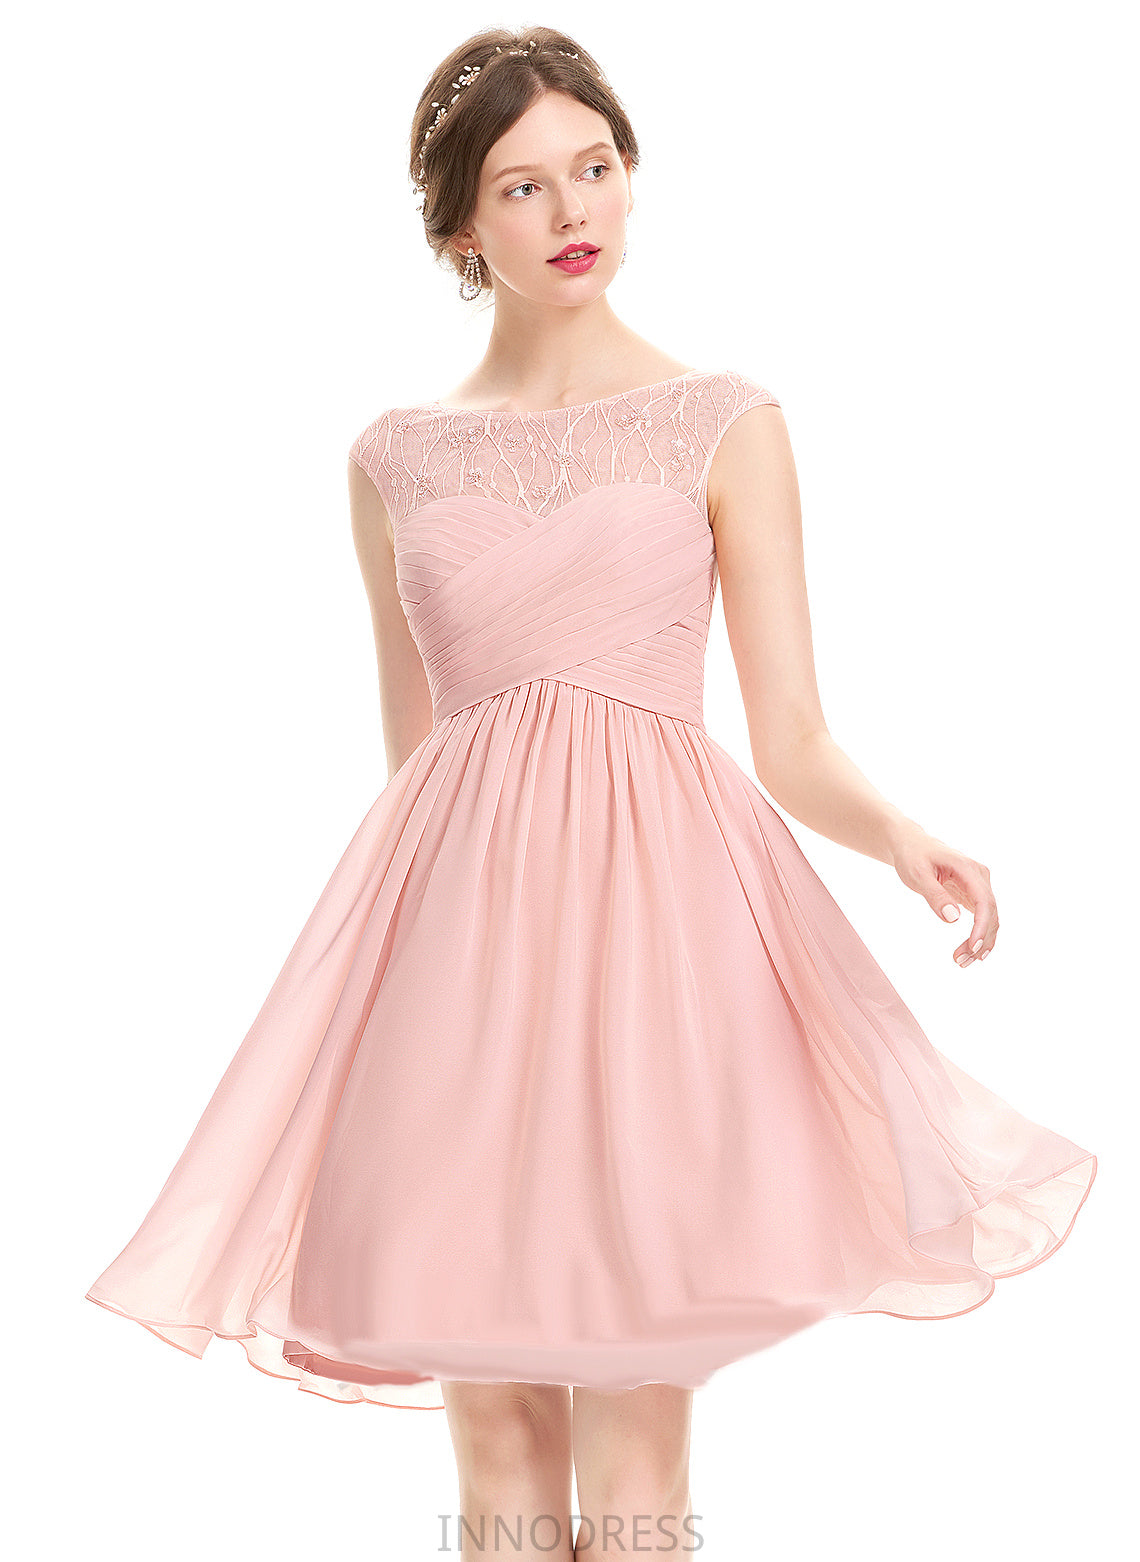 Scoop A-Line Knee-Length Beading Prom Dresses Lace Wendy Ruffle With Neck Chiffon Sequins